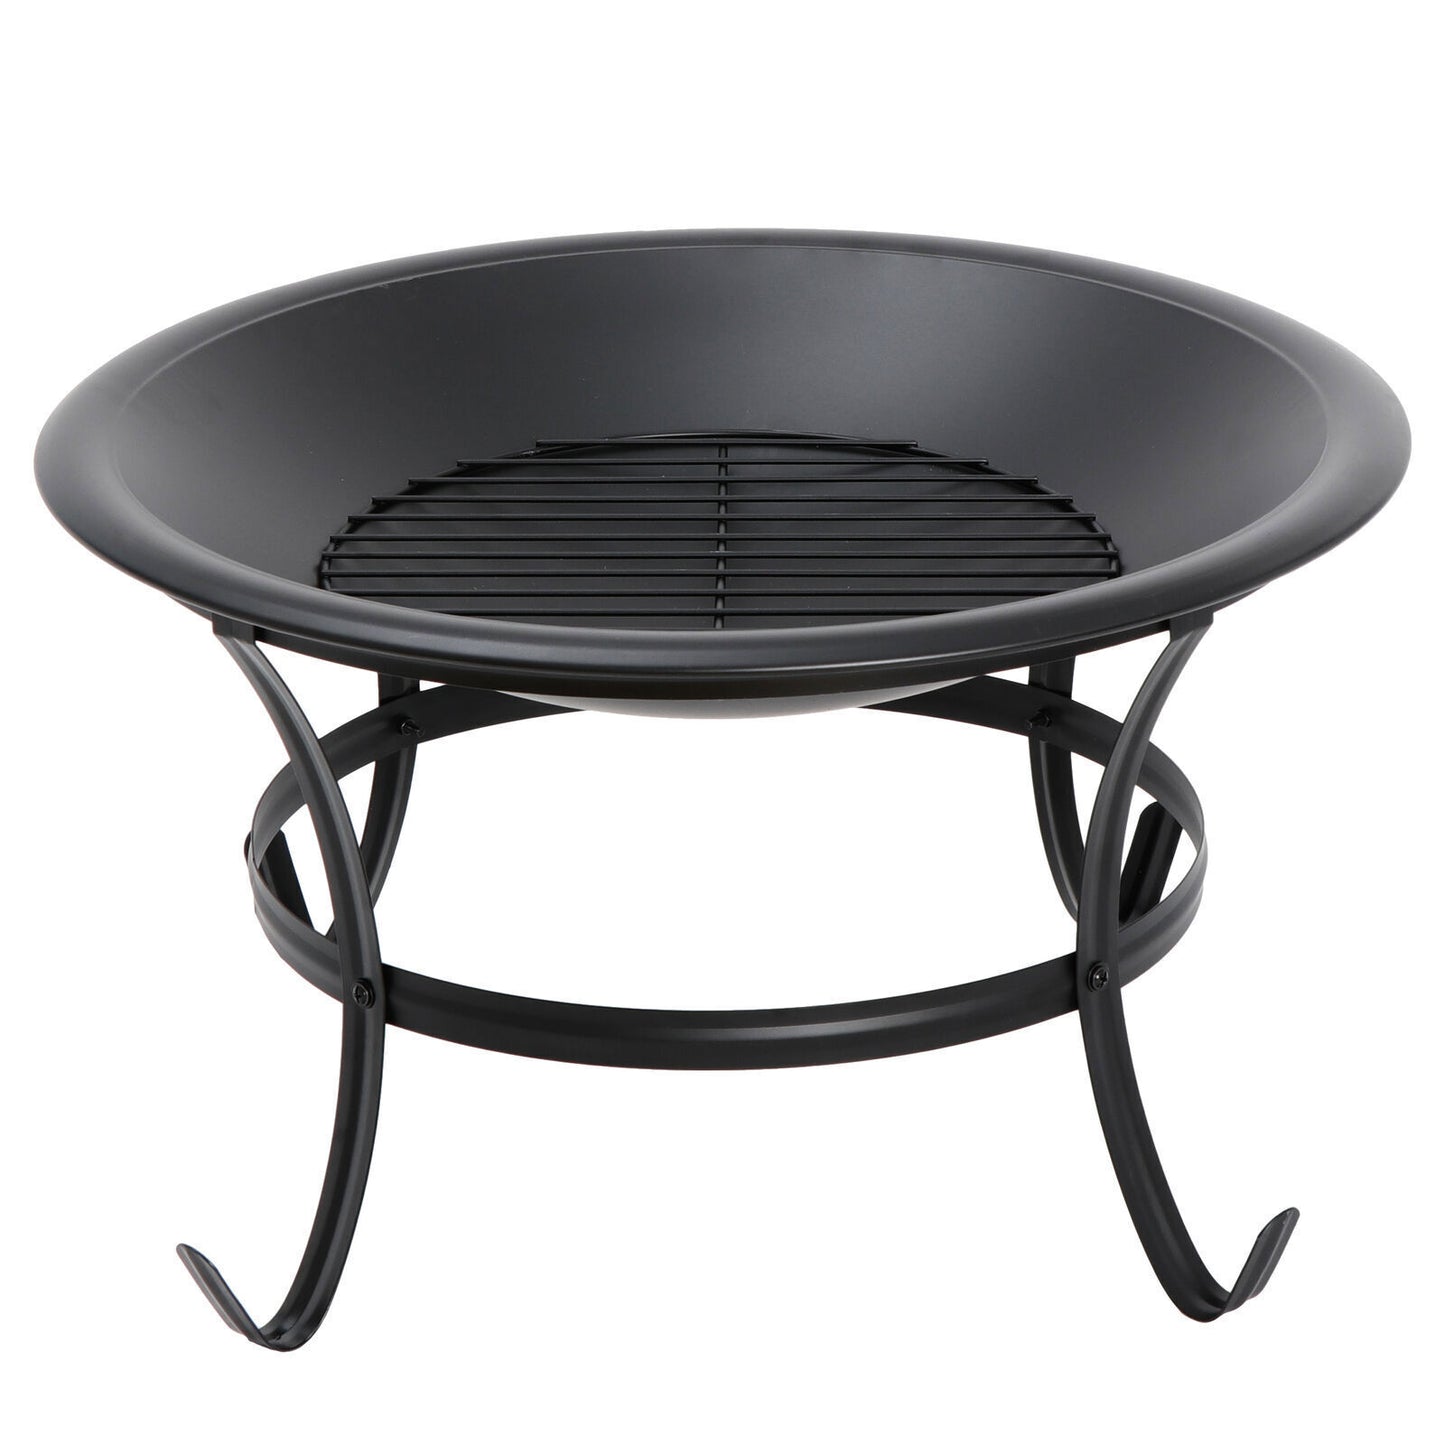 22" Round Fire Pit Patio Wood Burning Bowl Stove Fireplace W/ Lid Poker Black